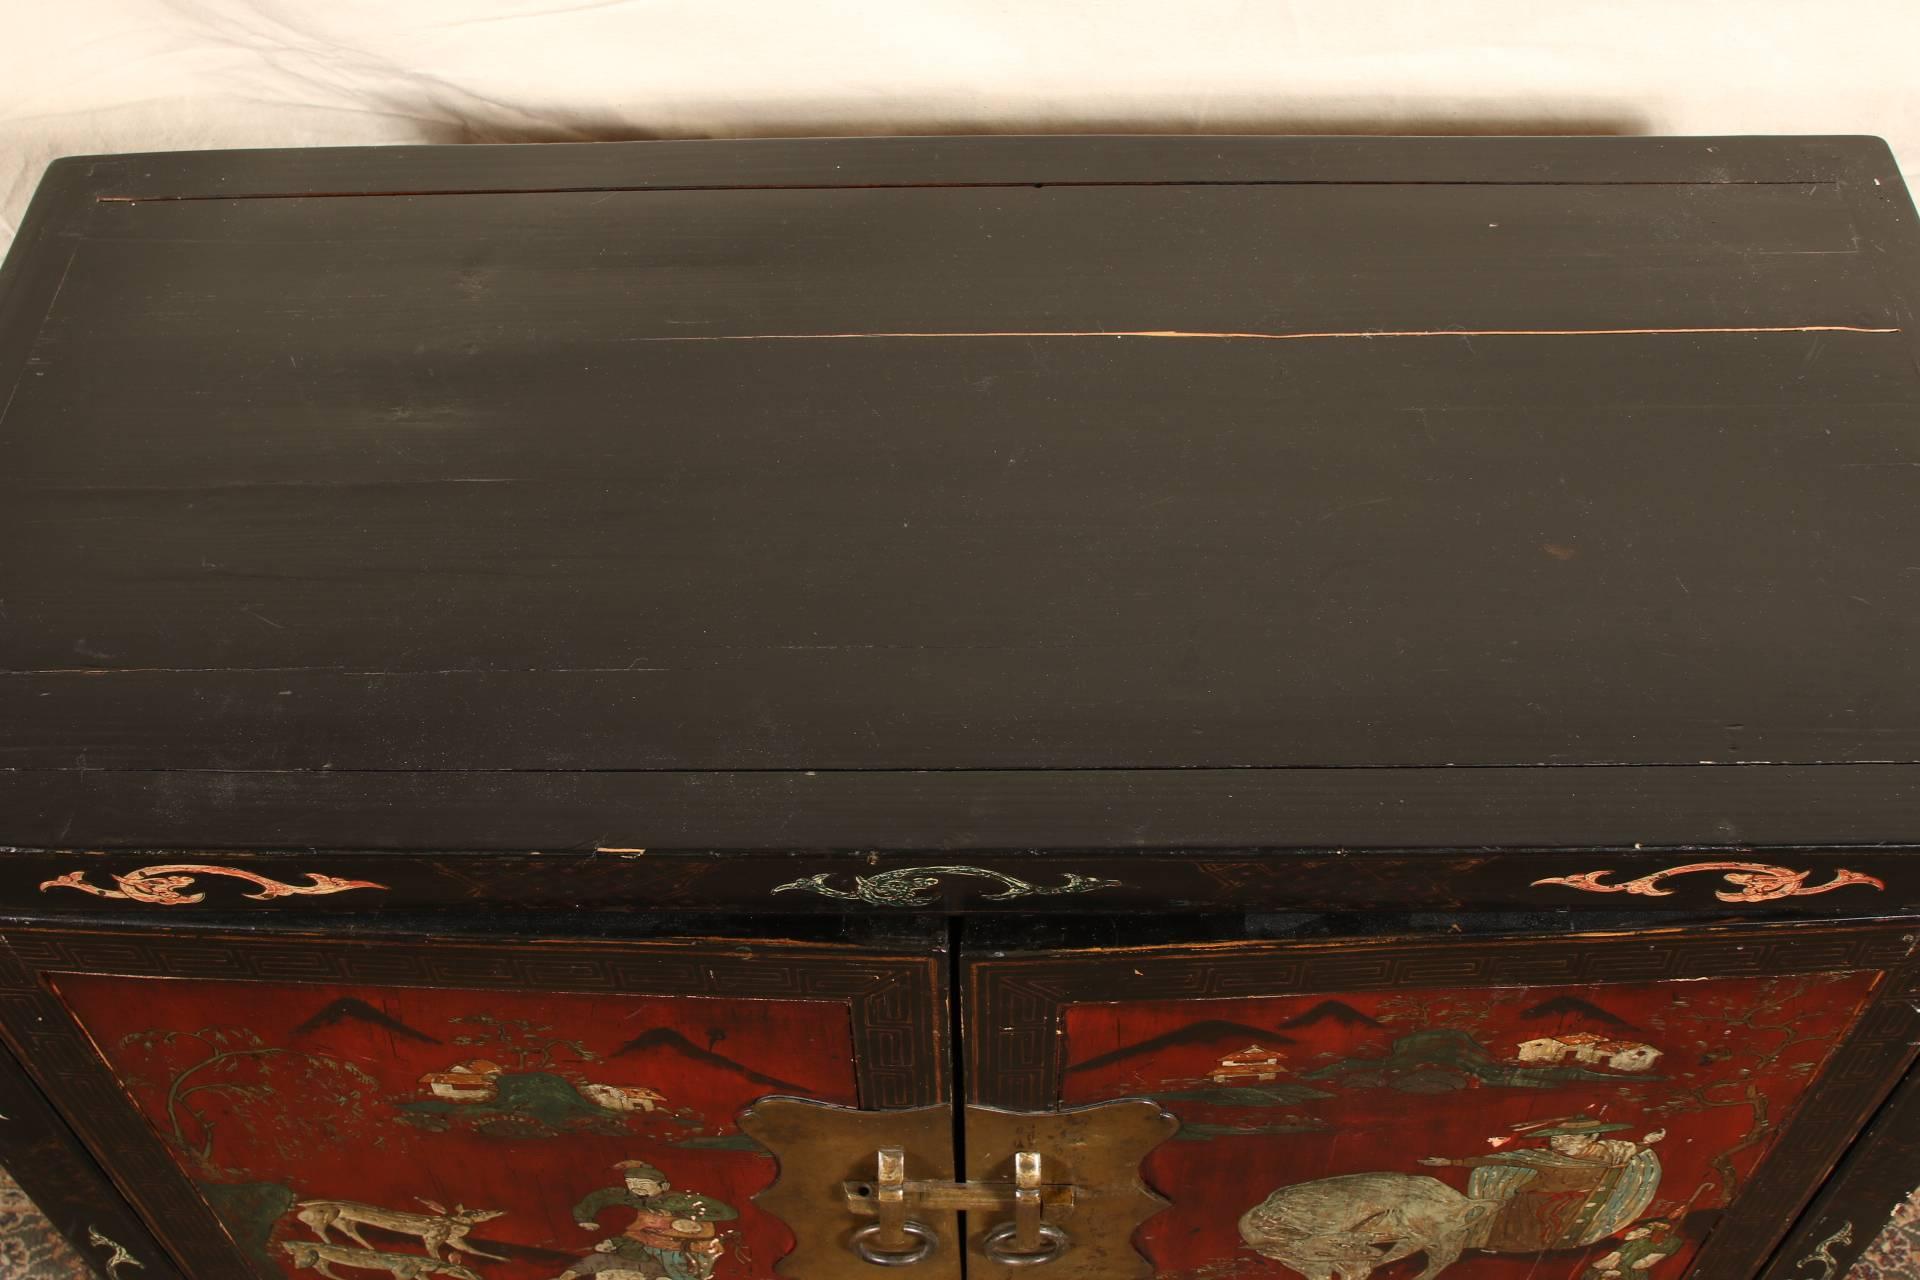 Ebonized double door cabinet with paintings of figures and animals in a landscape. The borders and shaped base with painted symbols. The interior with a single shelf. Brass hardware.
Condition: some scratches and wear to the paint.